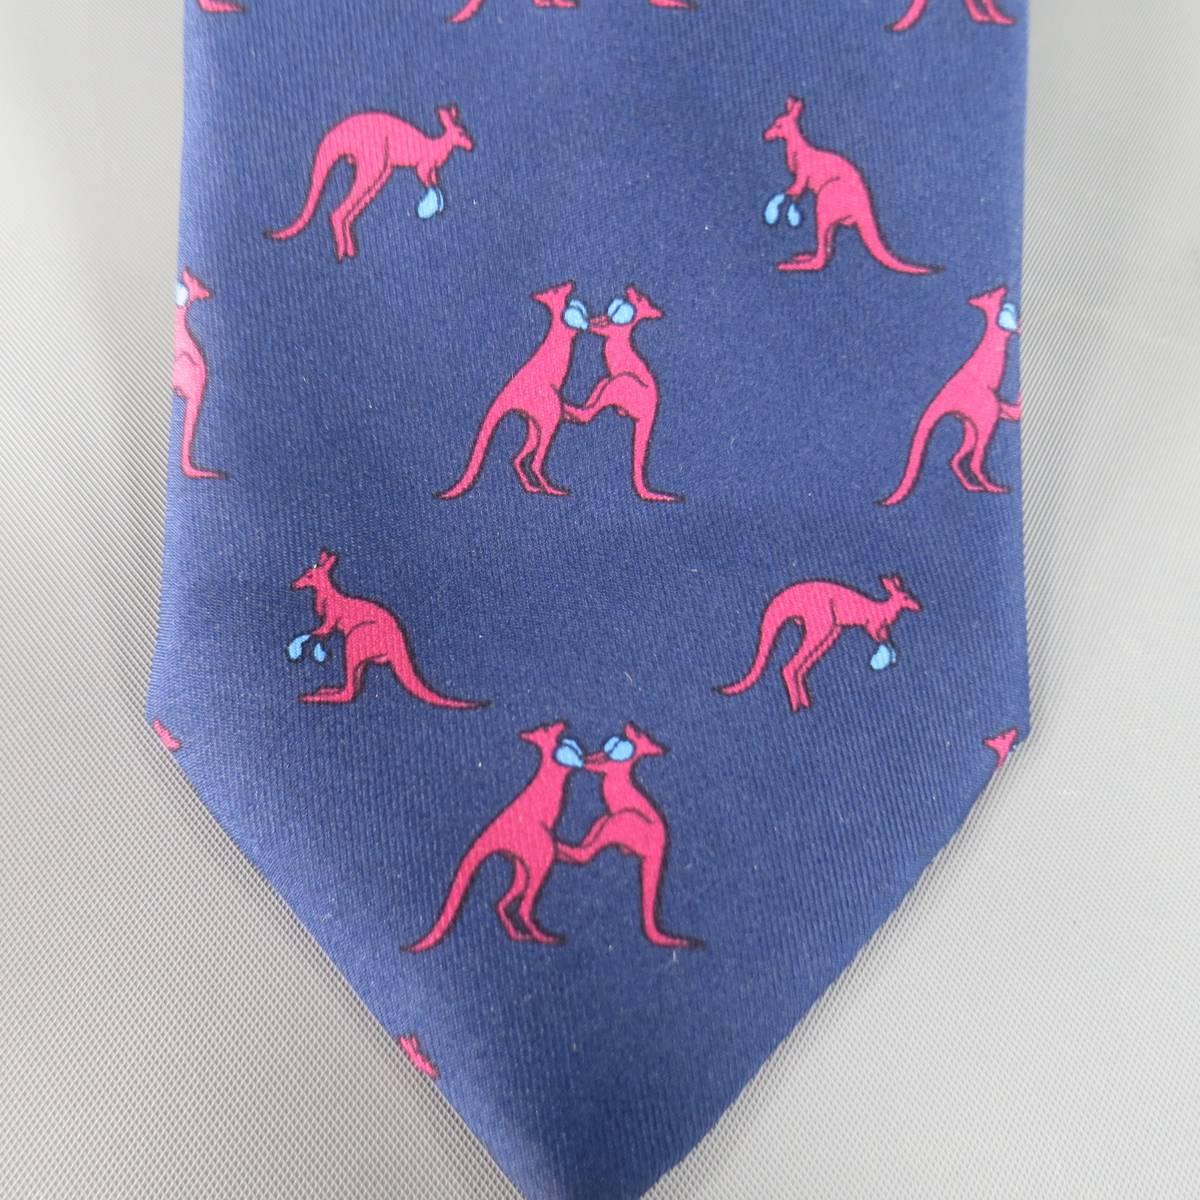 HERMES Tie consists of 100% silk material in a navy color tone. Designed in a slim contemporary style, graphic print throughout body. Detailed with boxing kangaroo's in red and light blue tones. Made in France.
 
Excellent Pre-Owned